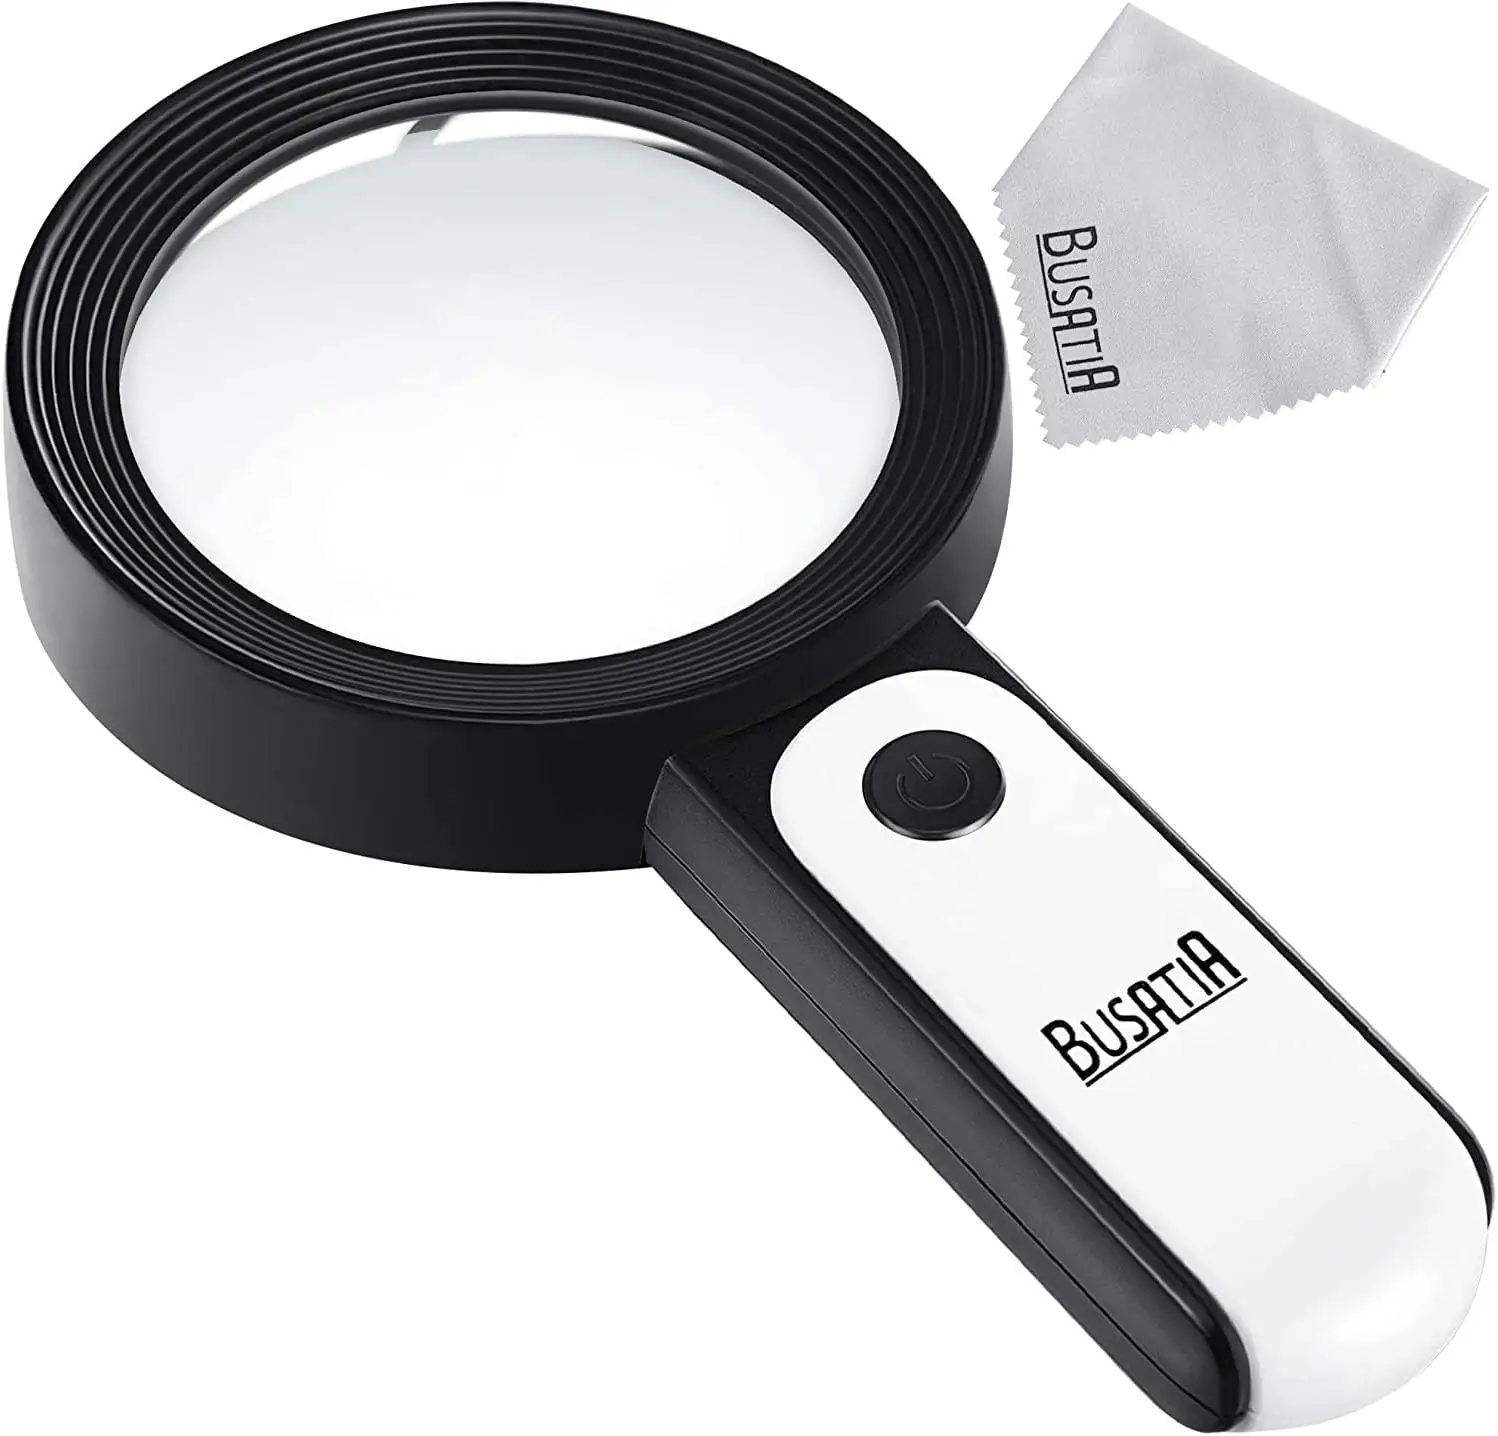 Magnifying Glass with 18 LED Light, 30 x Handheld Magnifying Glass with 3 Lighting Modes, Magnifying Glass for Reading